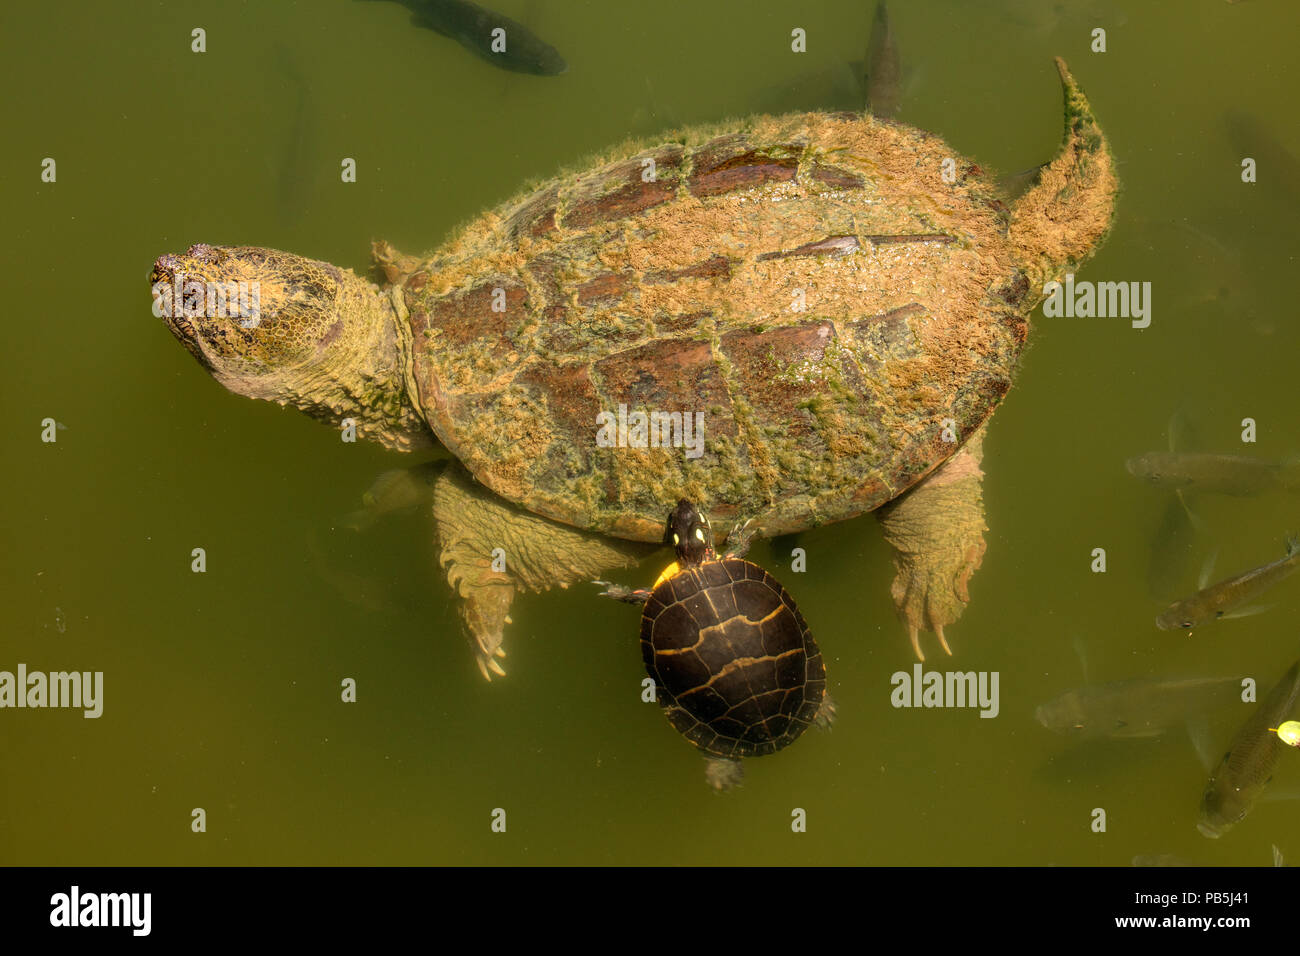 snapping turtle, Chelydra serpentina, and painted turtle Chrysemys picta, Maryland,  feeding on the algae on the back of snapping turtles Stock Photo